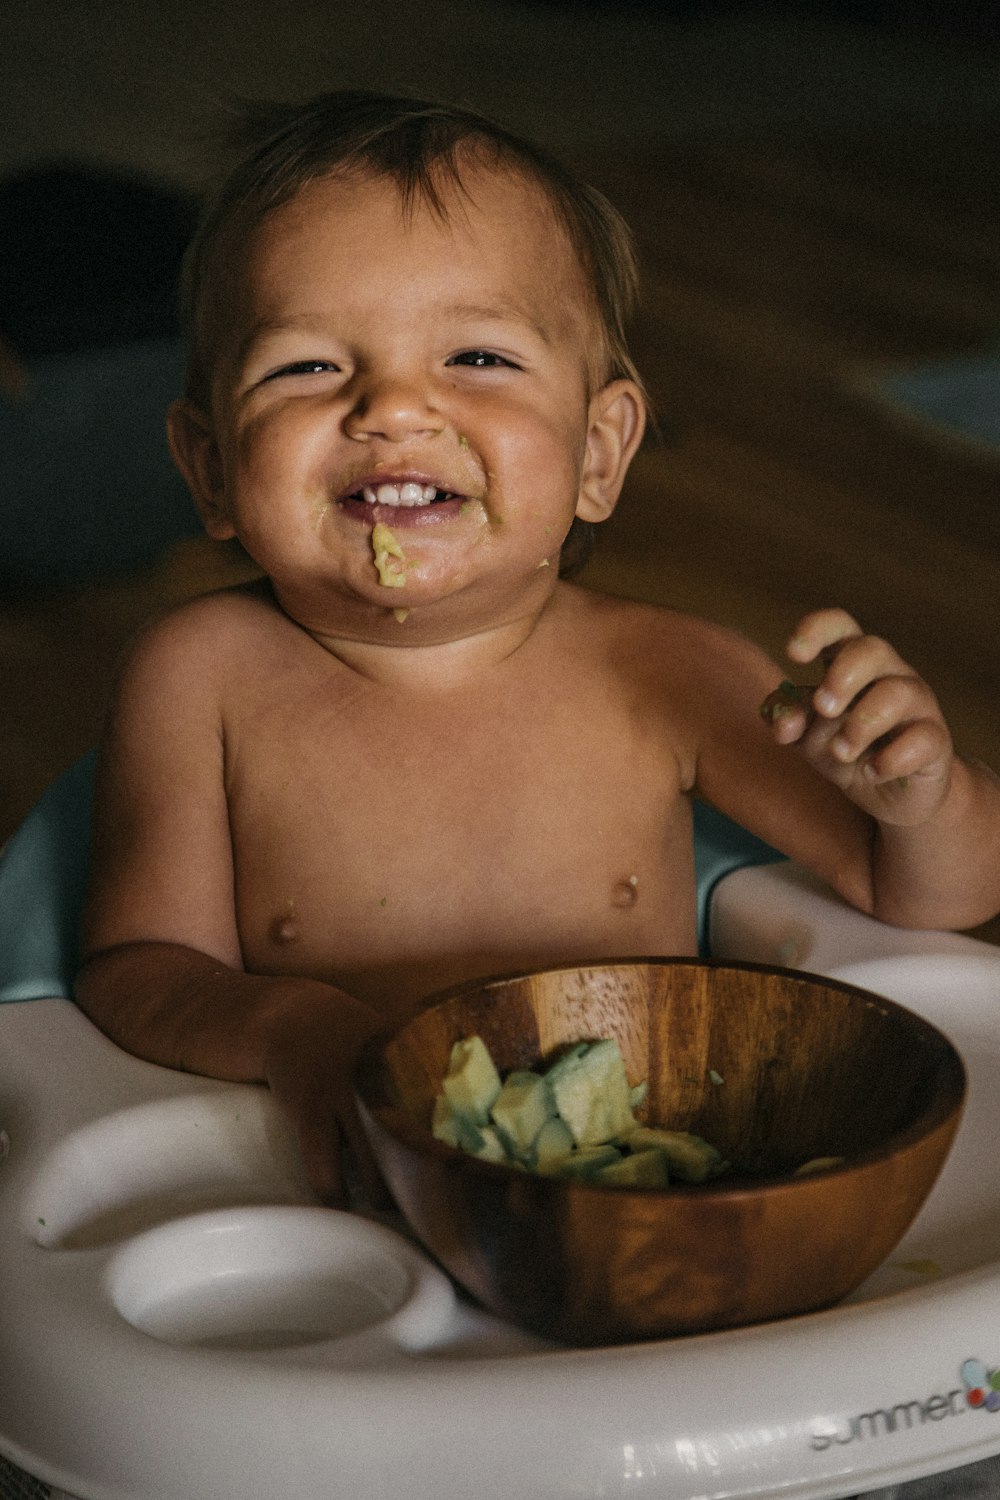 man eating vegetable in bowl, baby, avocado, avocado for your baby